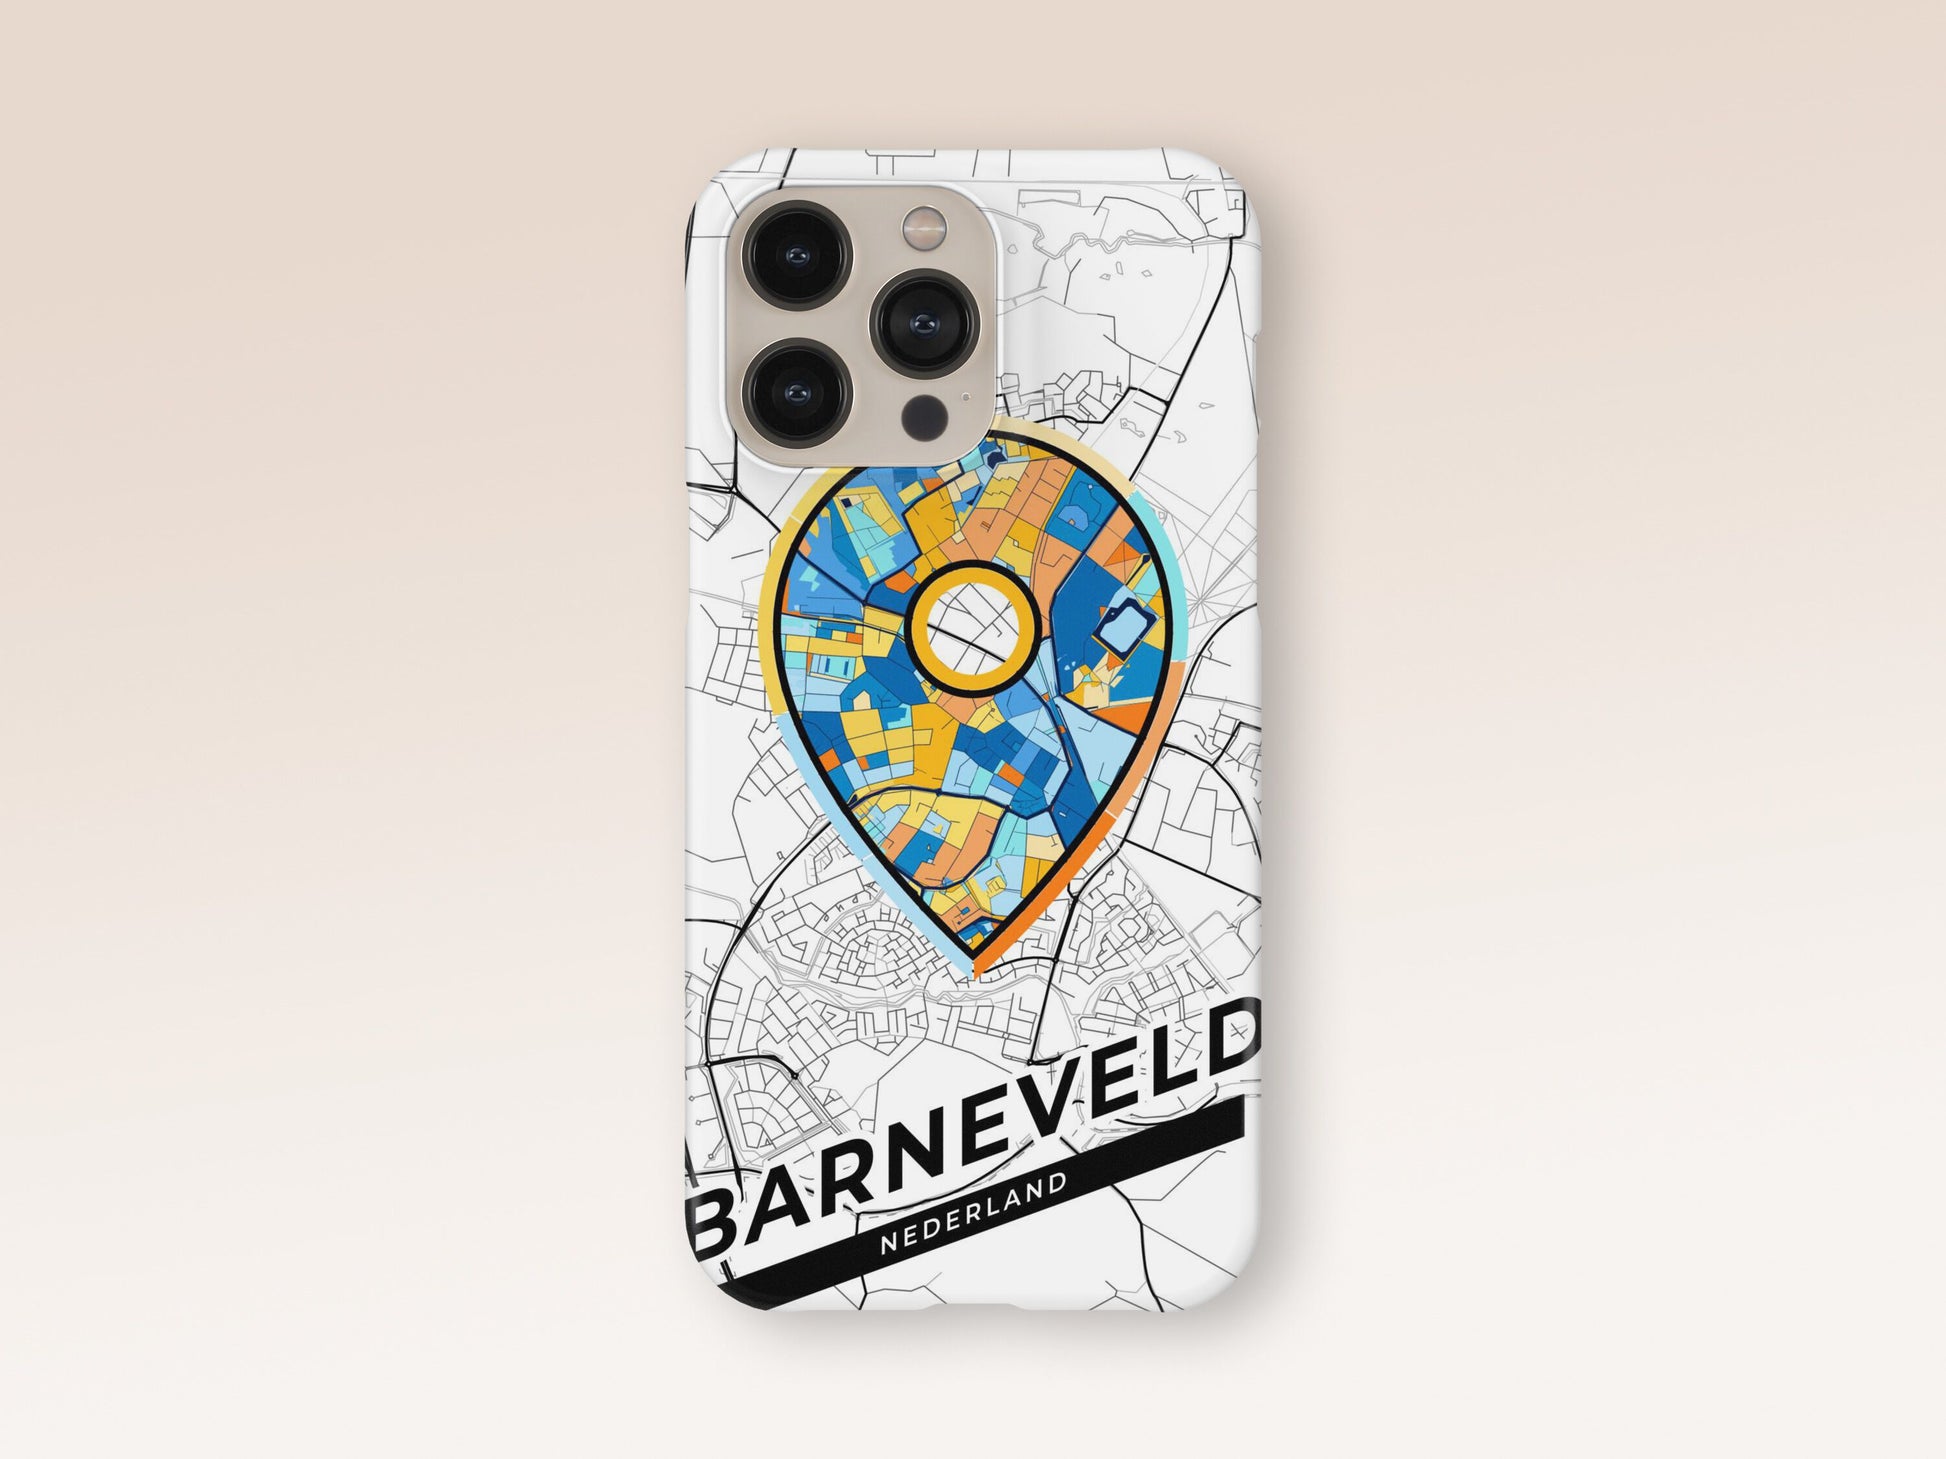 Barneveld Netherlands slim phone case with colorful icon. Birthday, wedding or housewarming gift. Couple match cases. 1